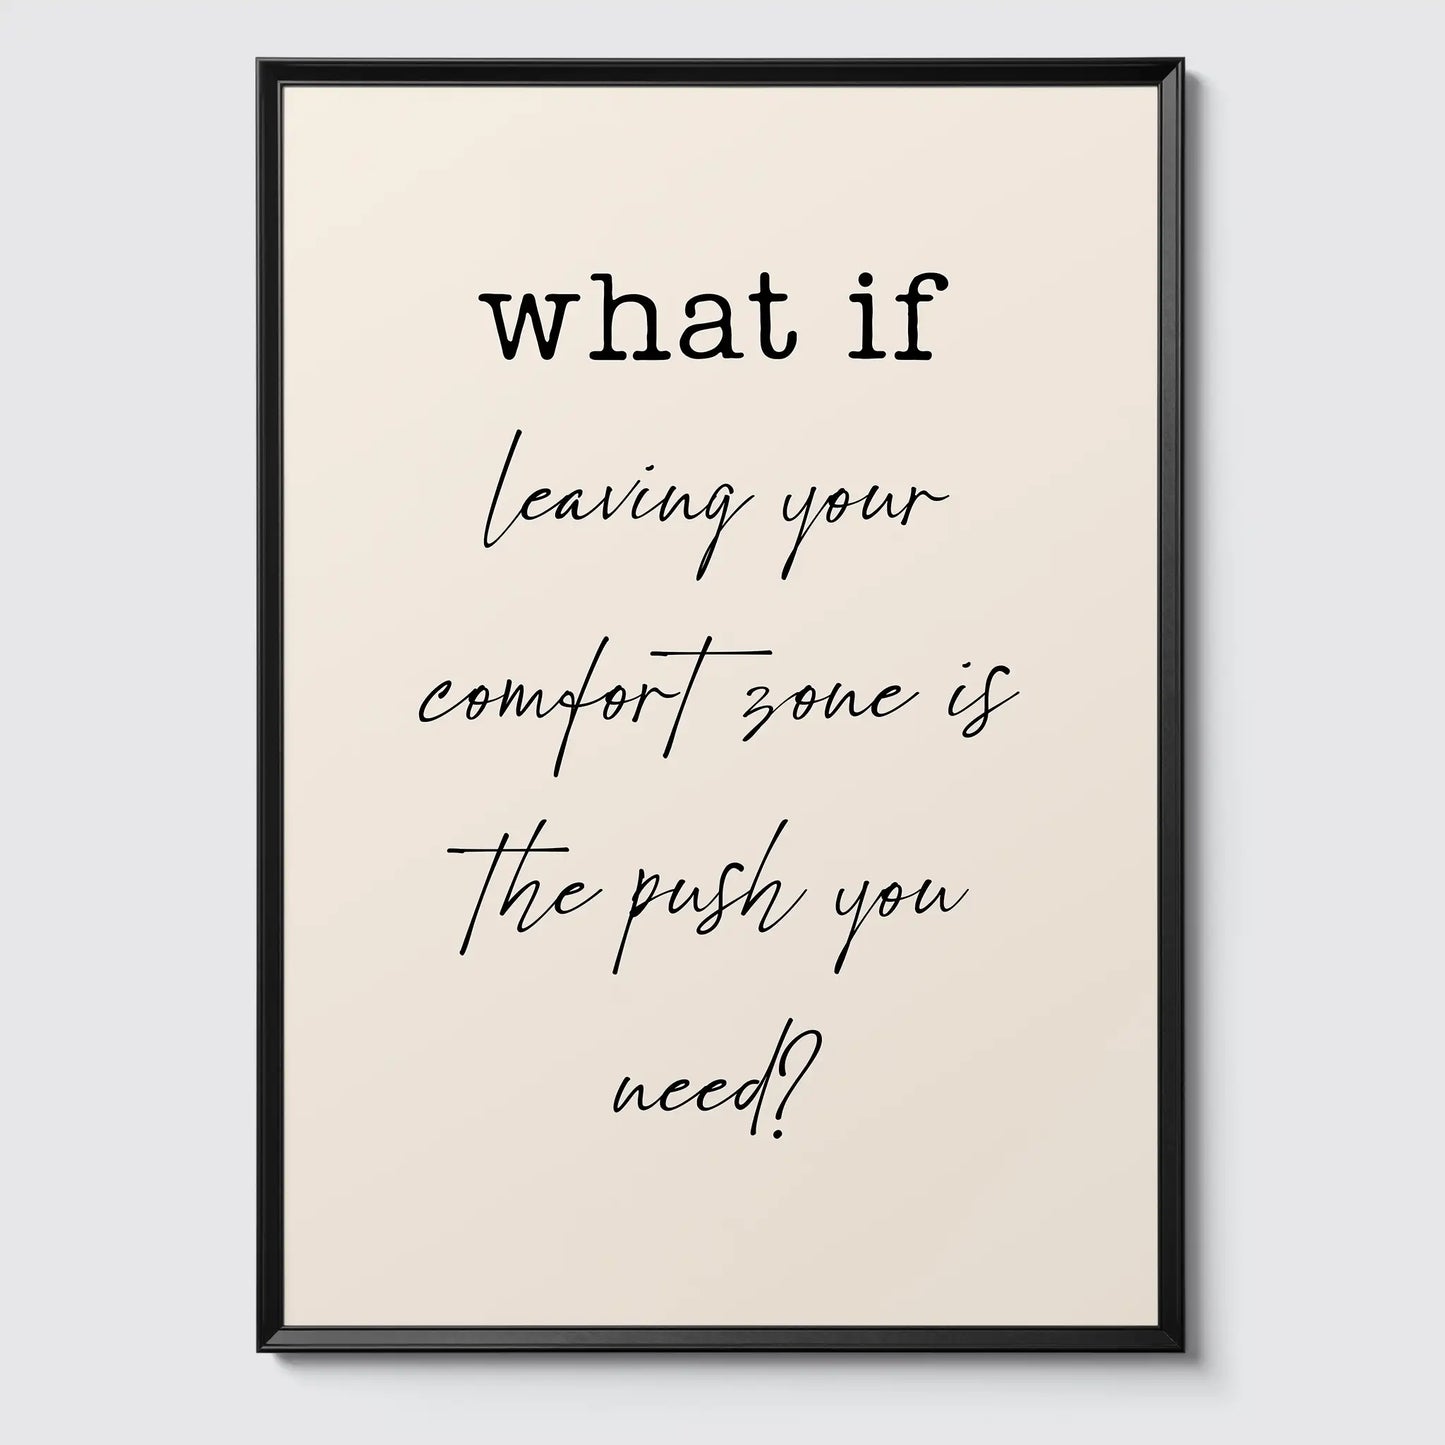 WHAT IF leaving your comfort zone is the push you need? - Poster